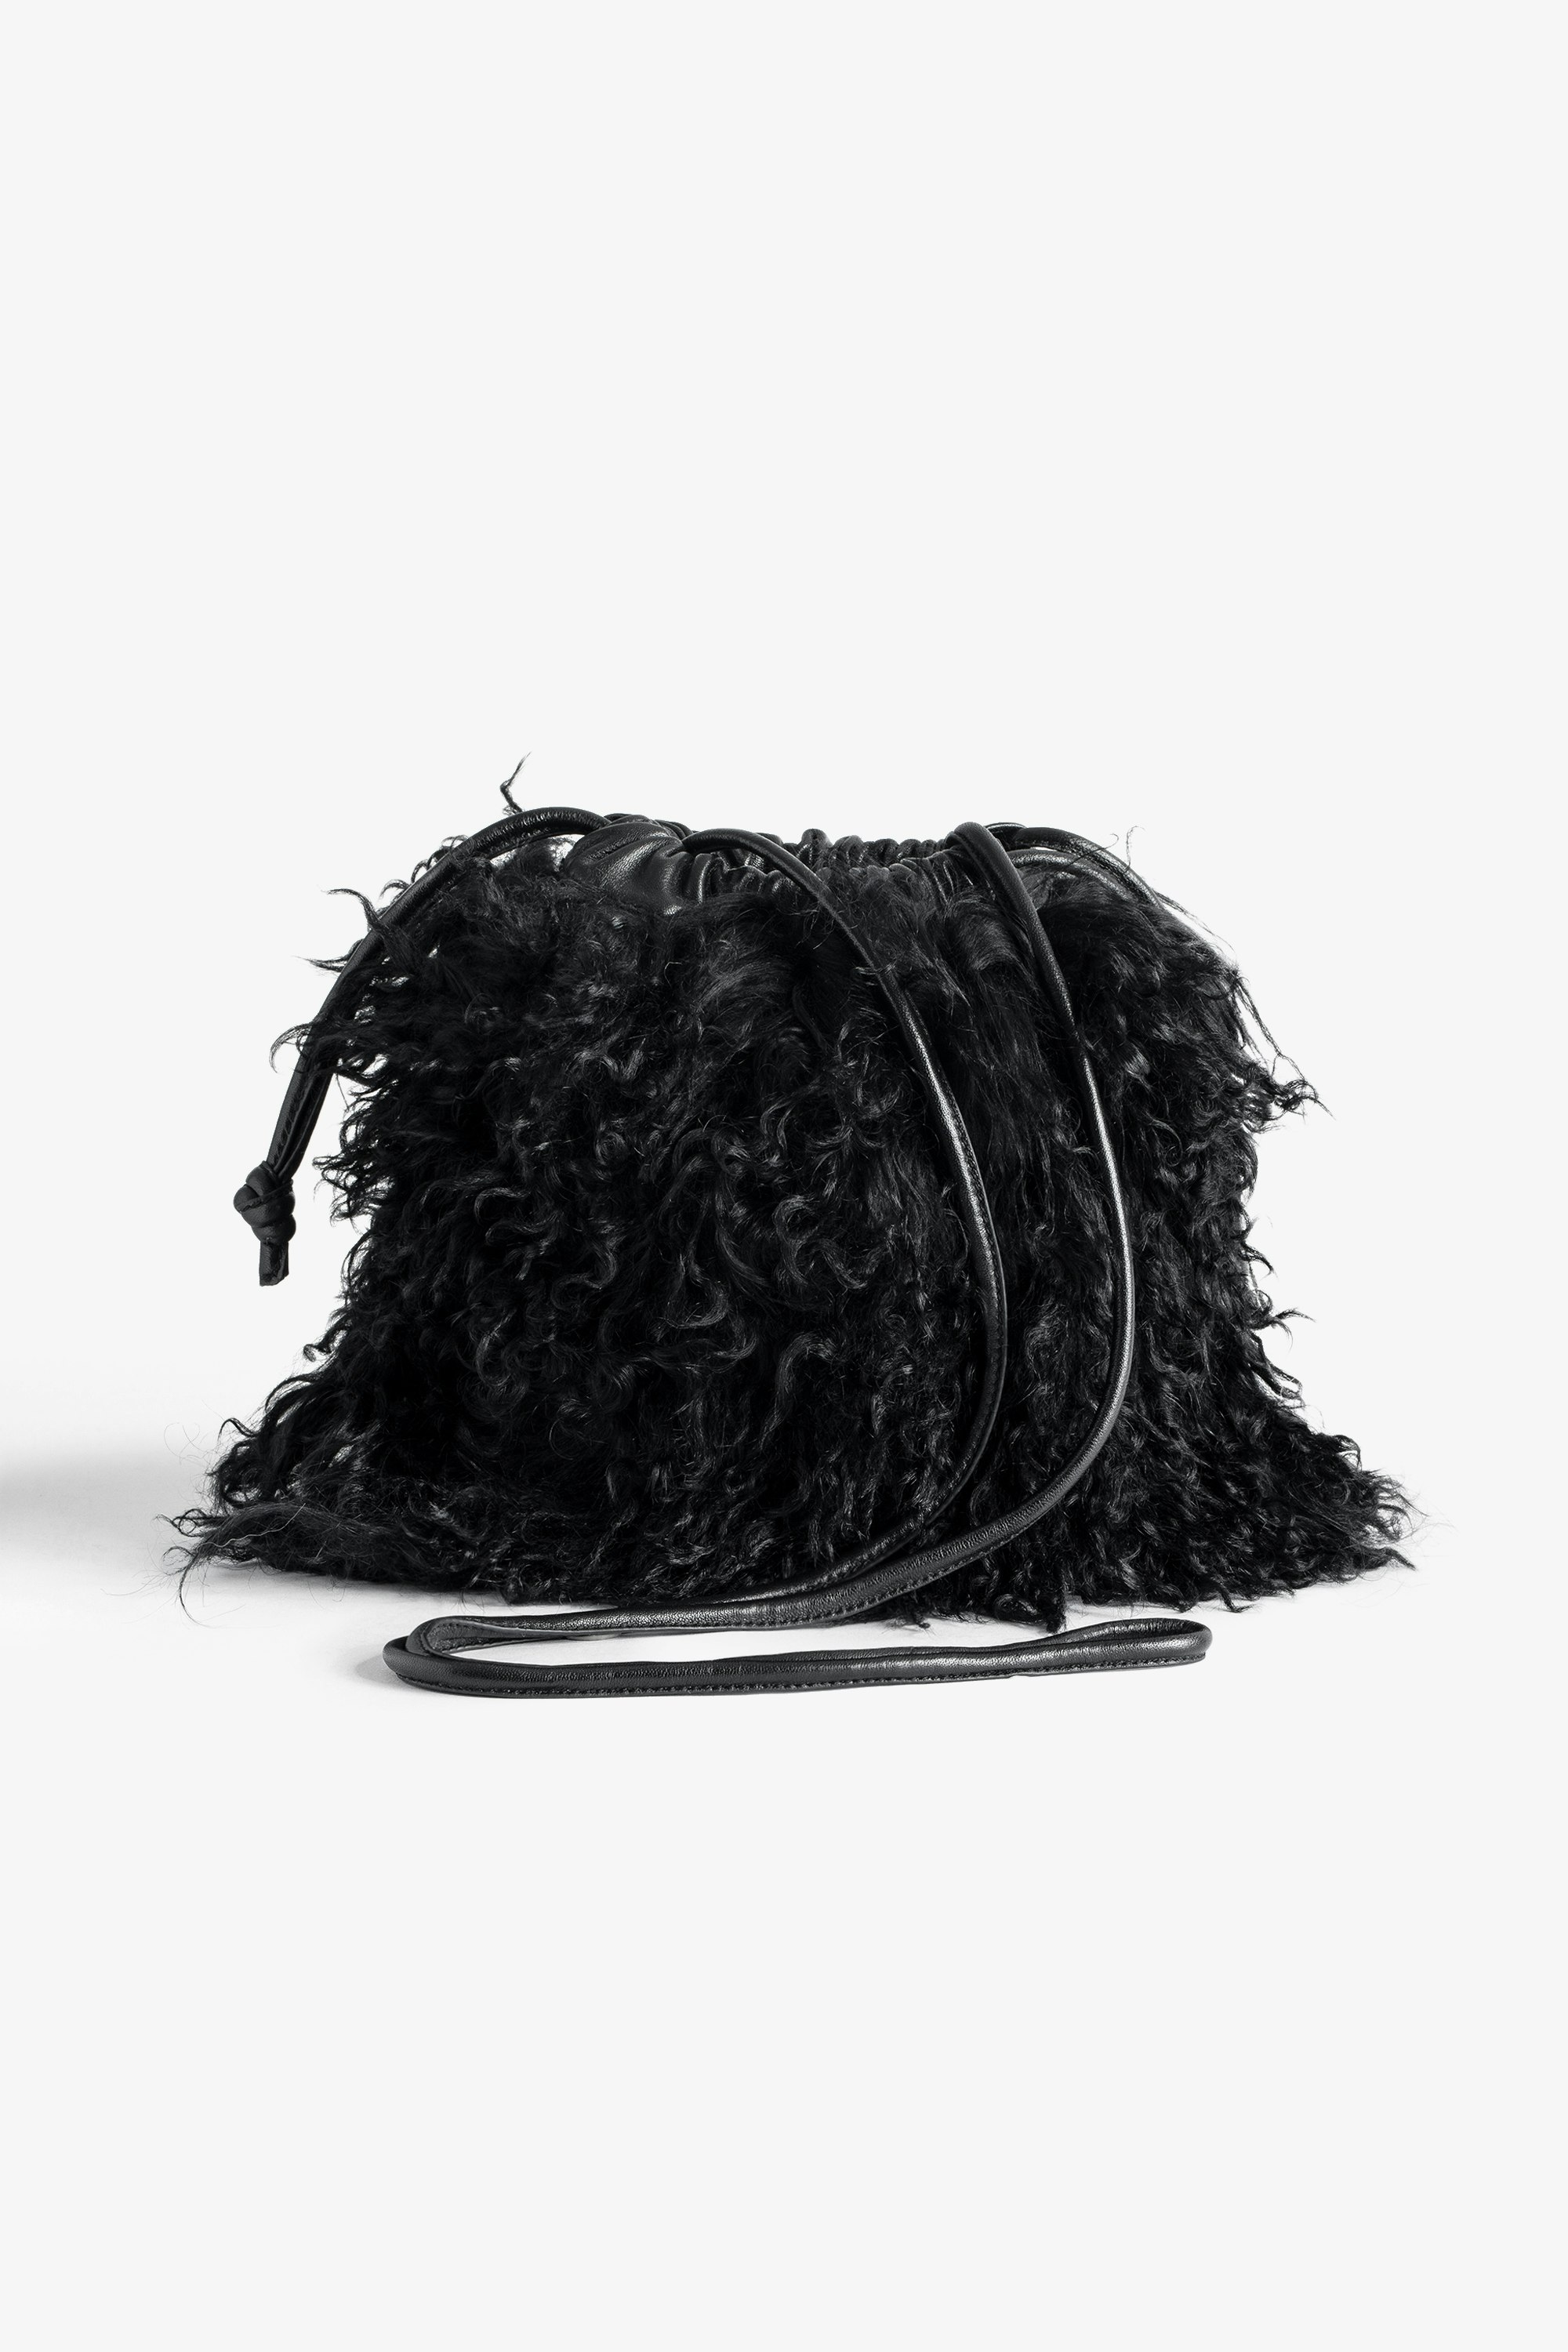 Rock To Go Frenzy Shearling Bag Women’s small bucket bag in black shearling with drawstring and shoulder strap.